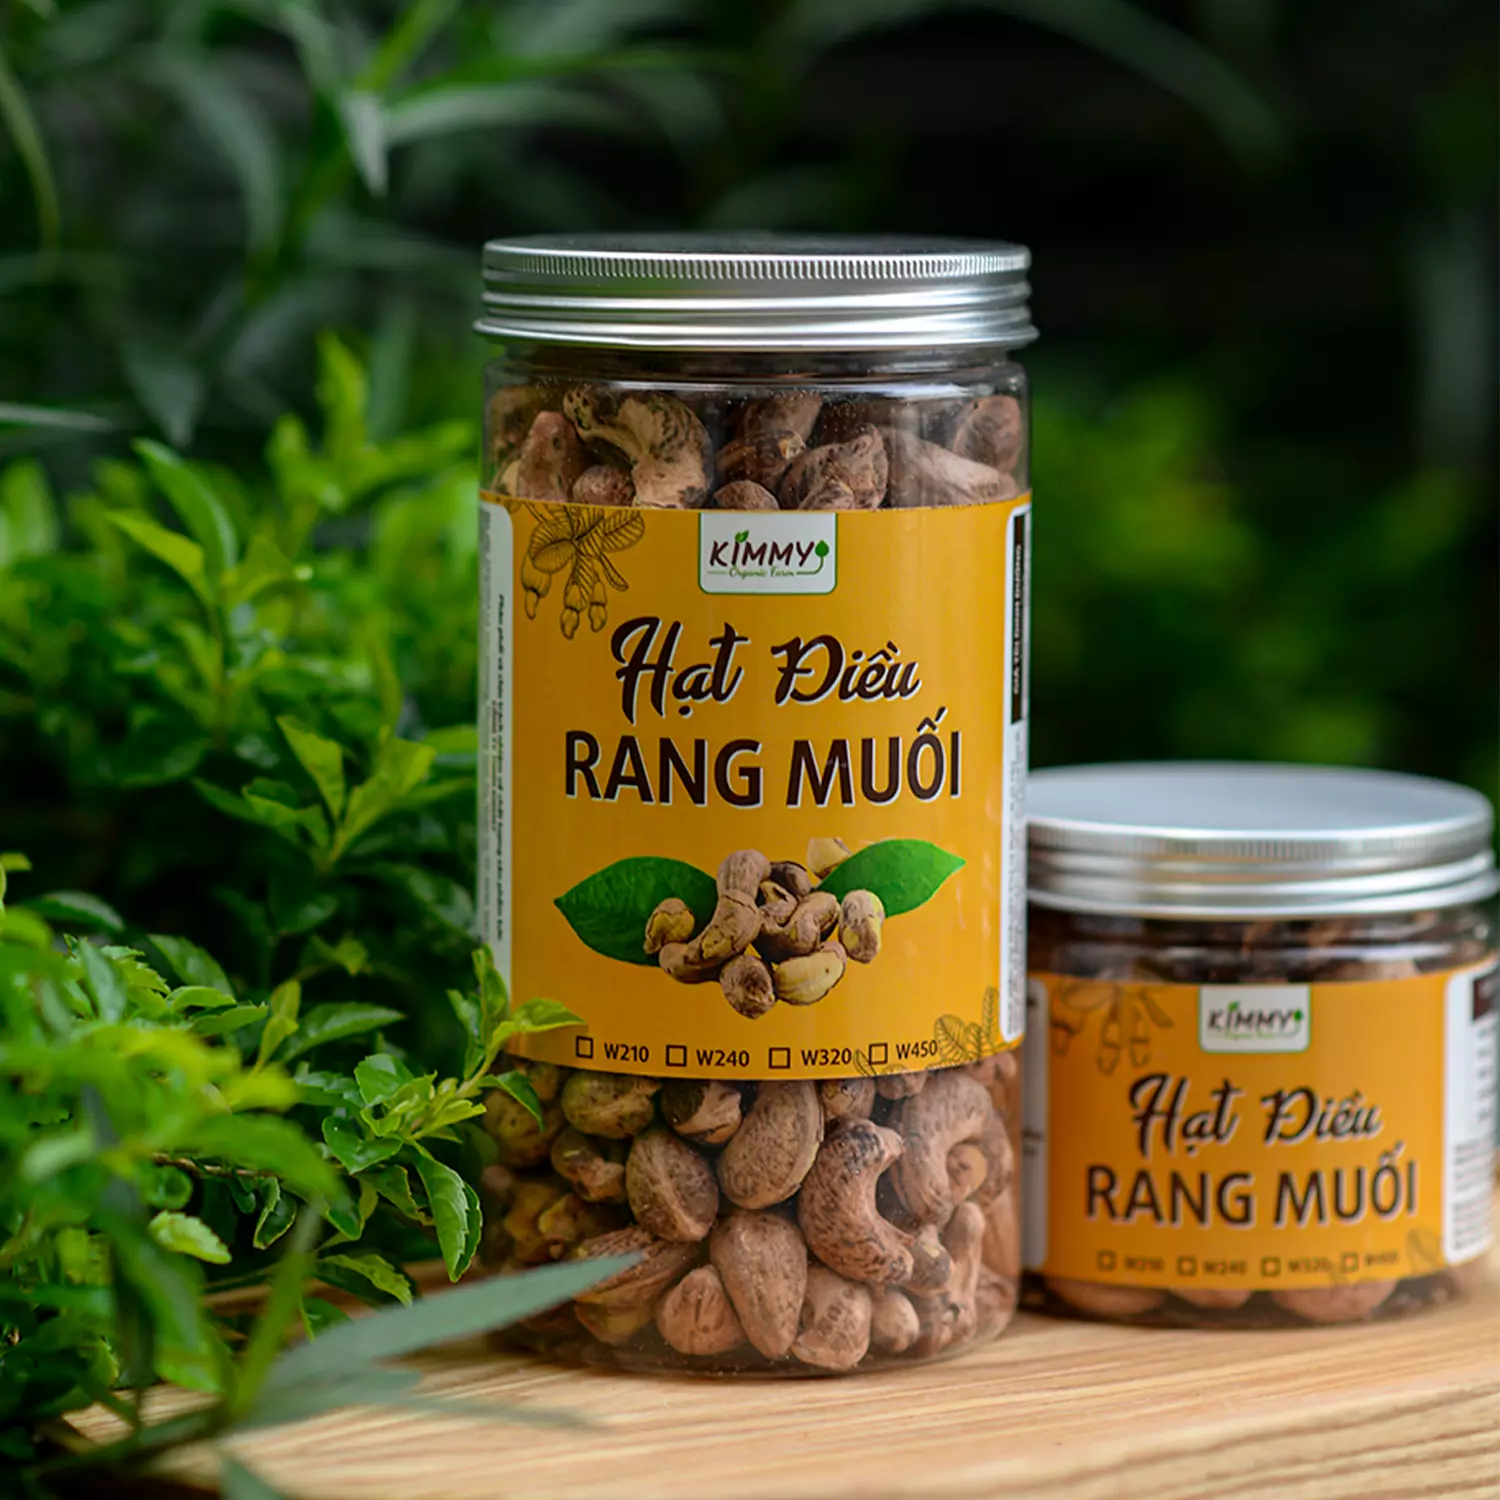 Koreans consider cashew nut as a precious gift  of high value - 500G and 250G Salted Roasted Cashew Jars Kimmy Farm Vietnam